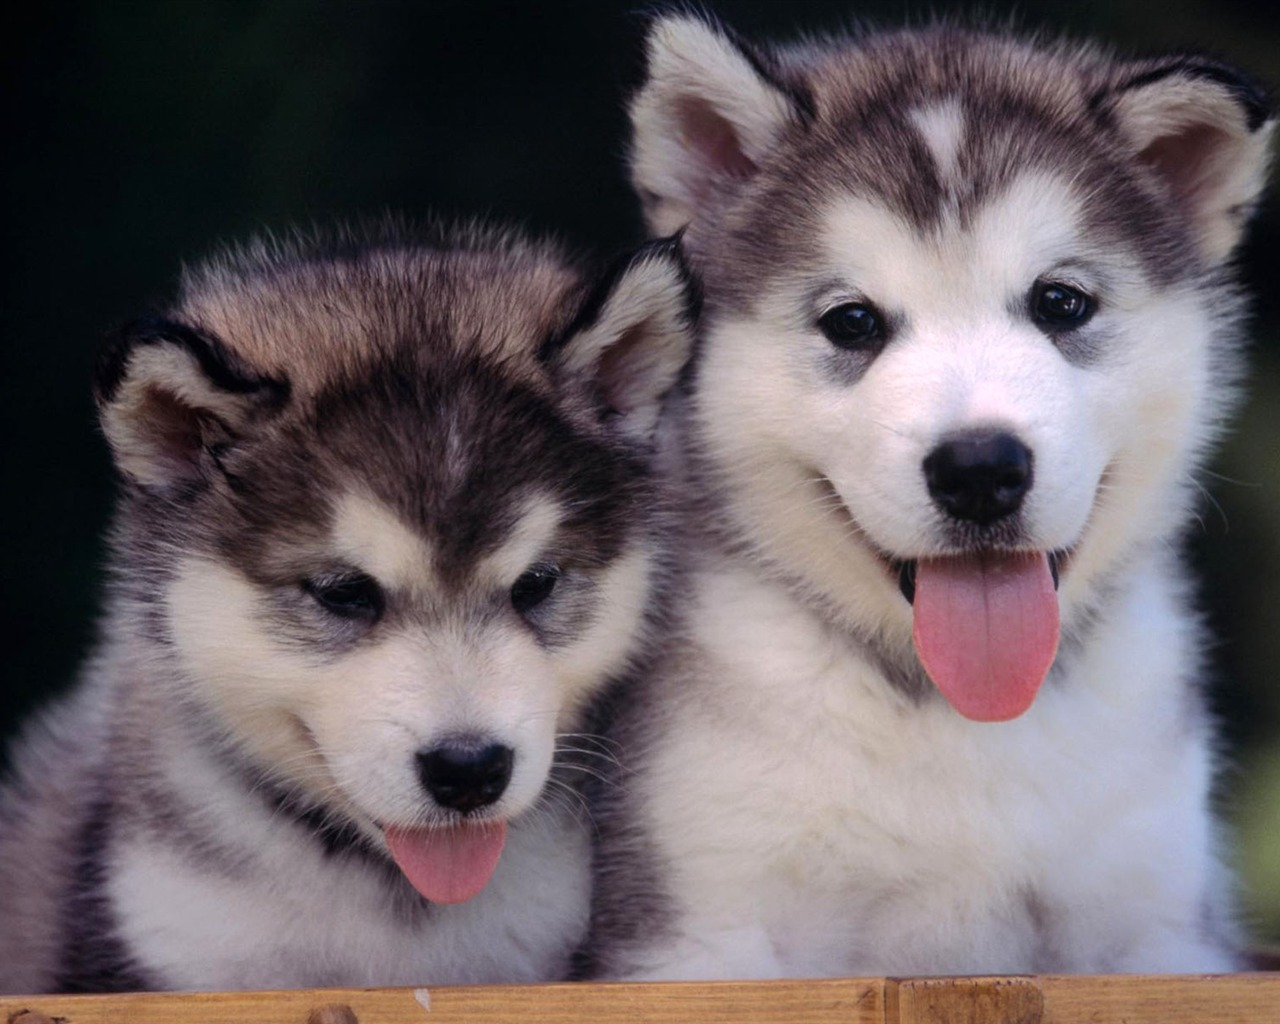 Puppy Photo HD wallpapers (2) #20 - 1280x1024